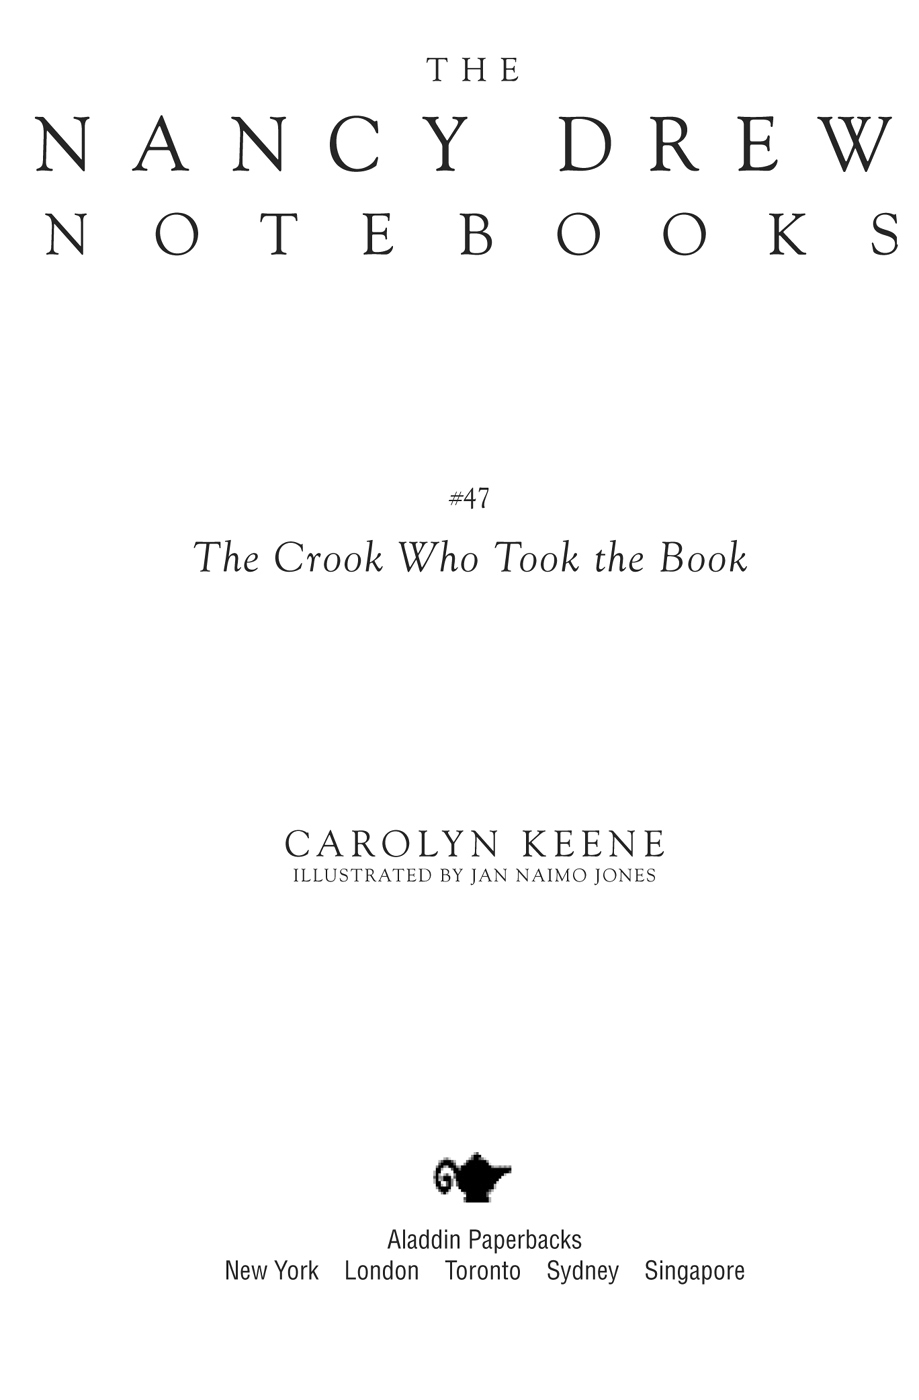 The Crook Who Took the Book by Carolyn Keene